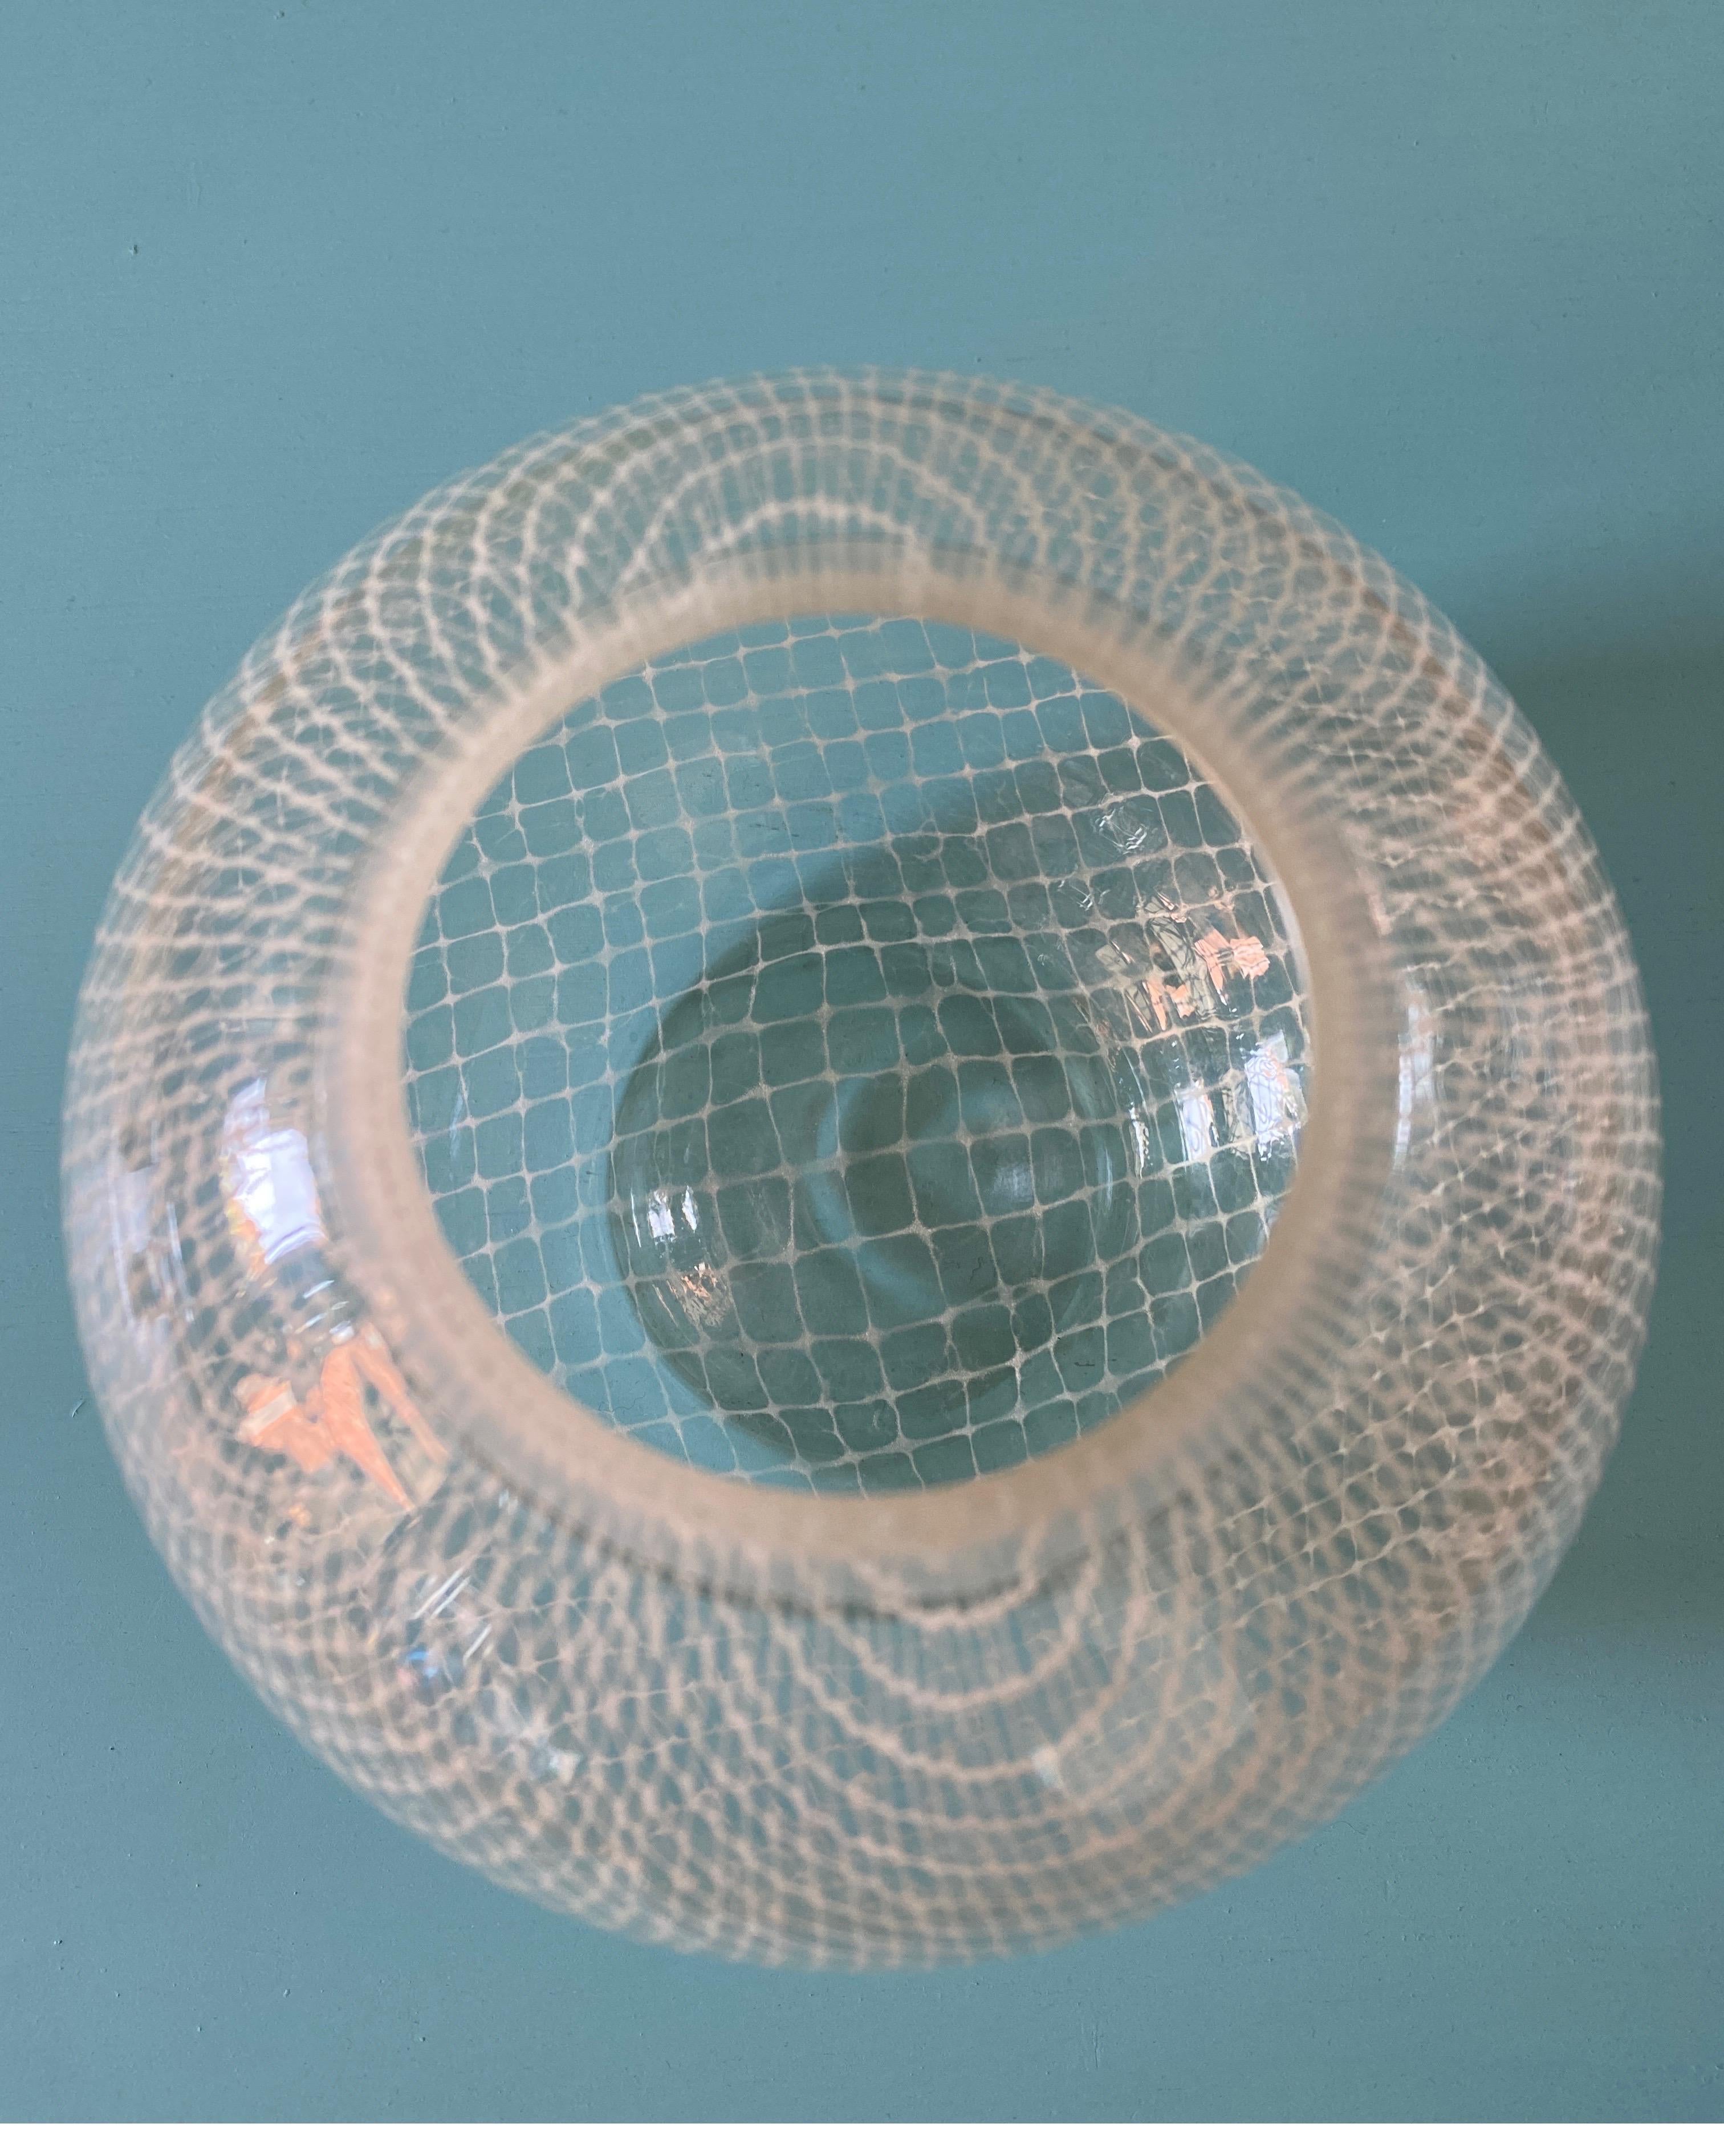 Merletto Glass Vase with Ground Lip, style of Harrachov Czech In Good Condition For Sale In Melbourne, AU